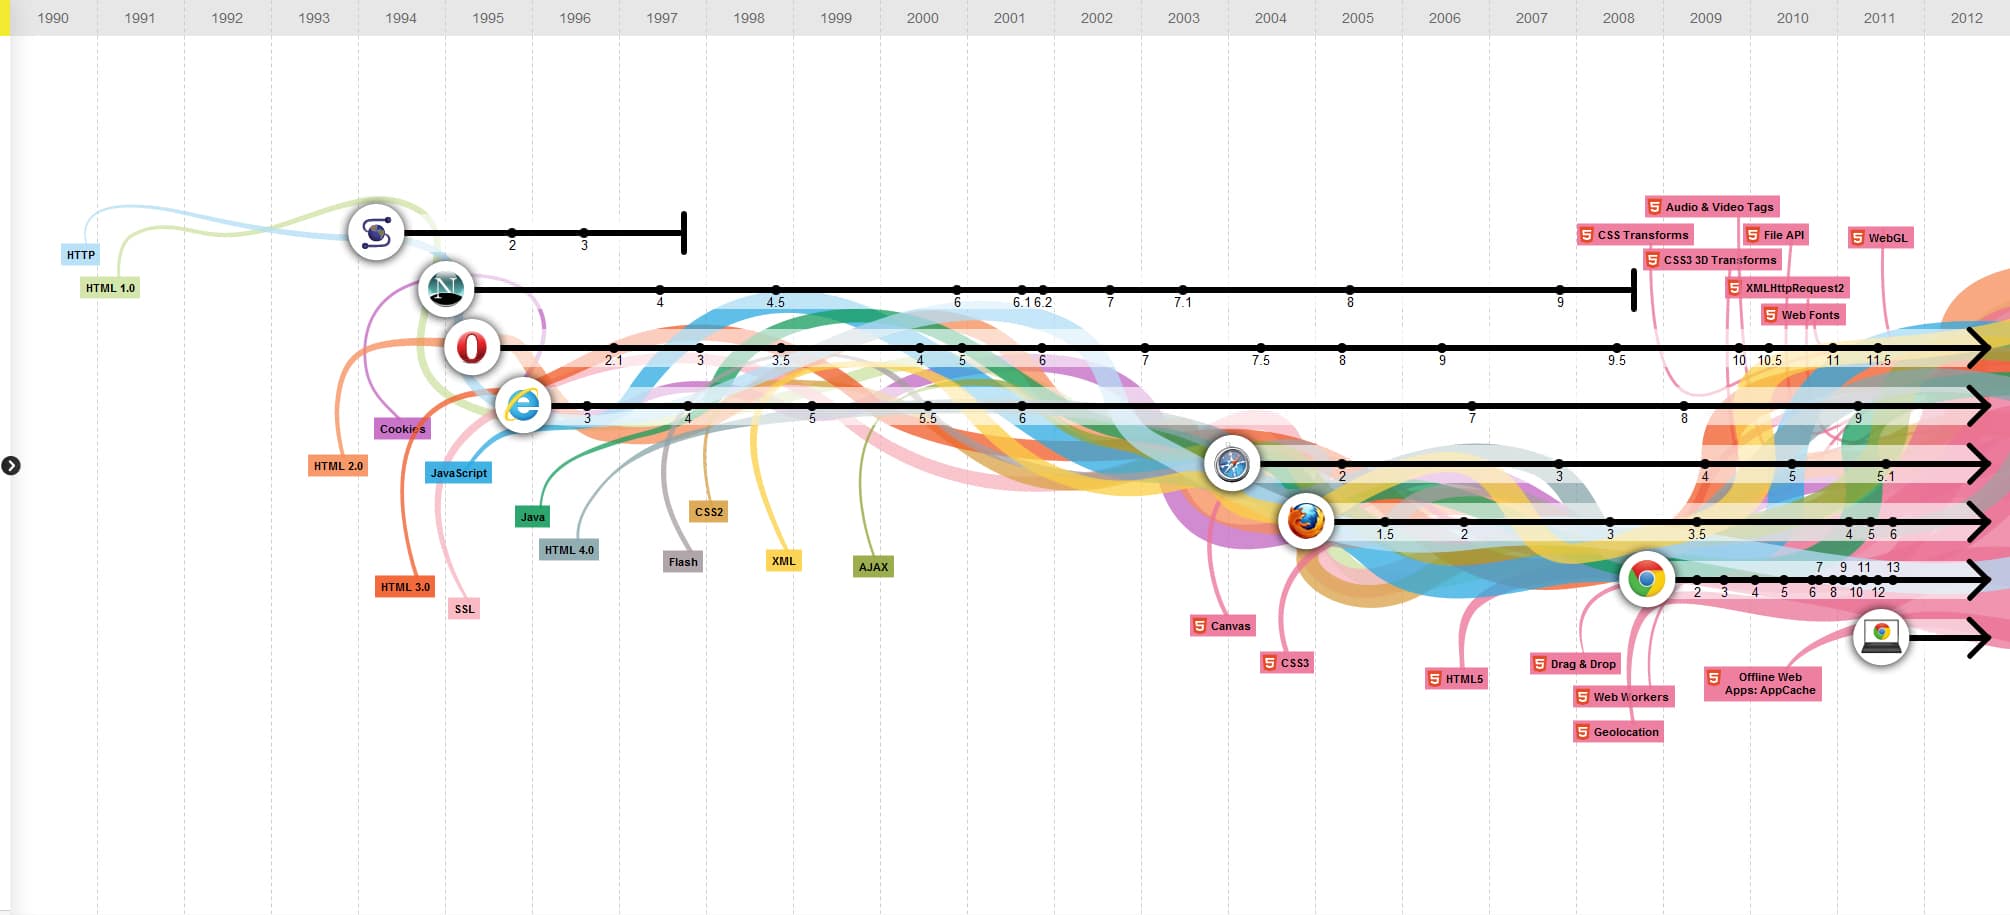 The Evolution Of The Web [Interactive Infographic]